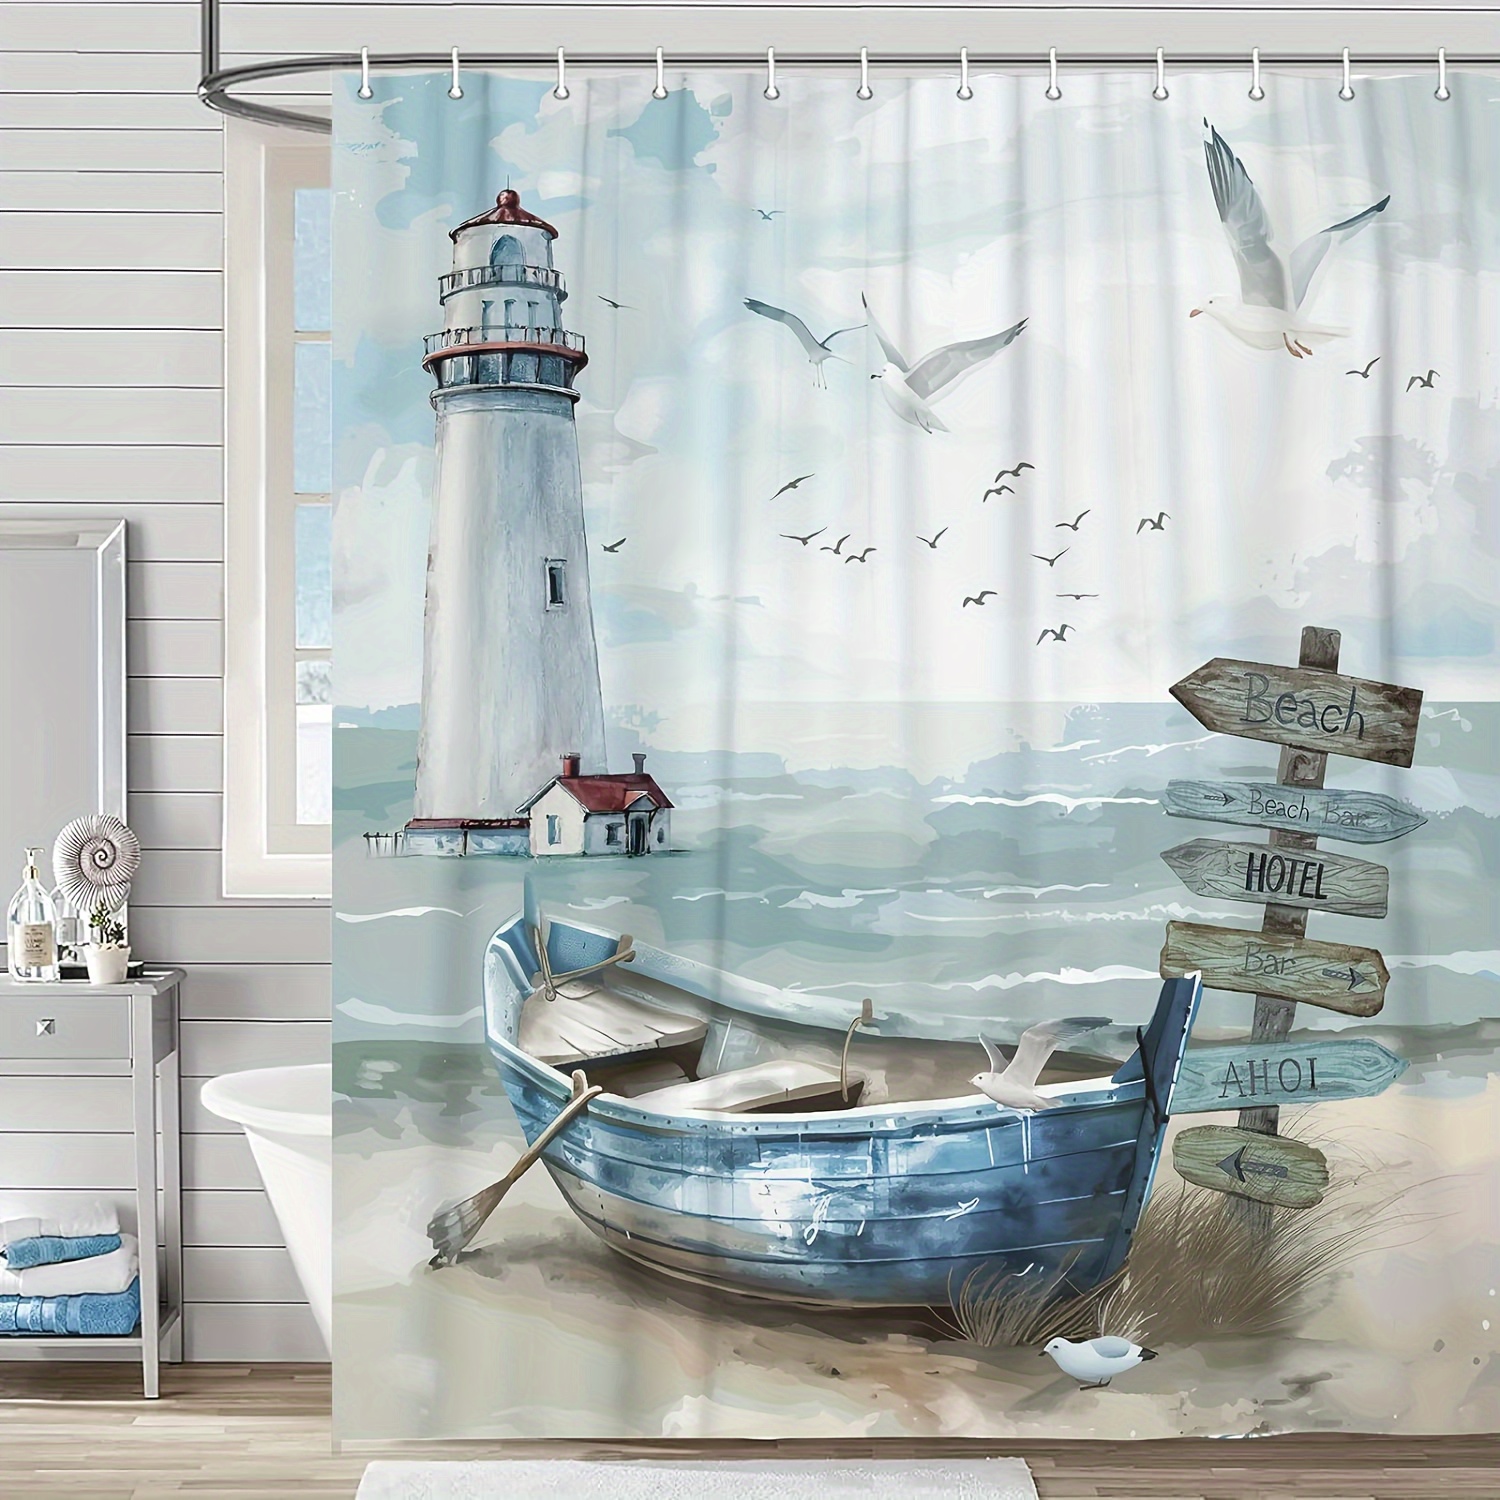 

coastal Haven" Coastal Charm Shower Curtain Set - Ocean Beach & Lighthouse Design, Waterproof Polyester With Hooks Included, Perfect For Bathroom Decor